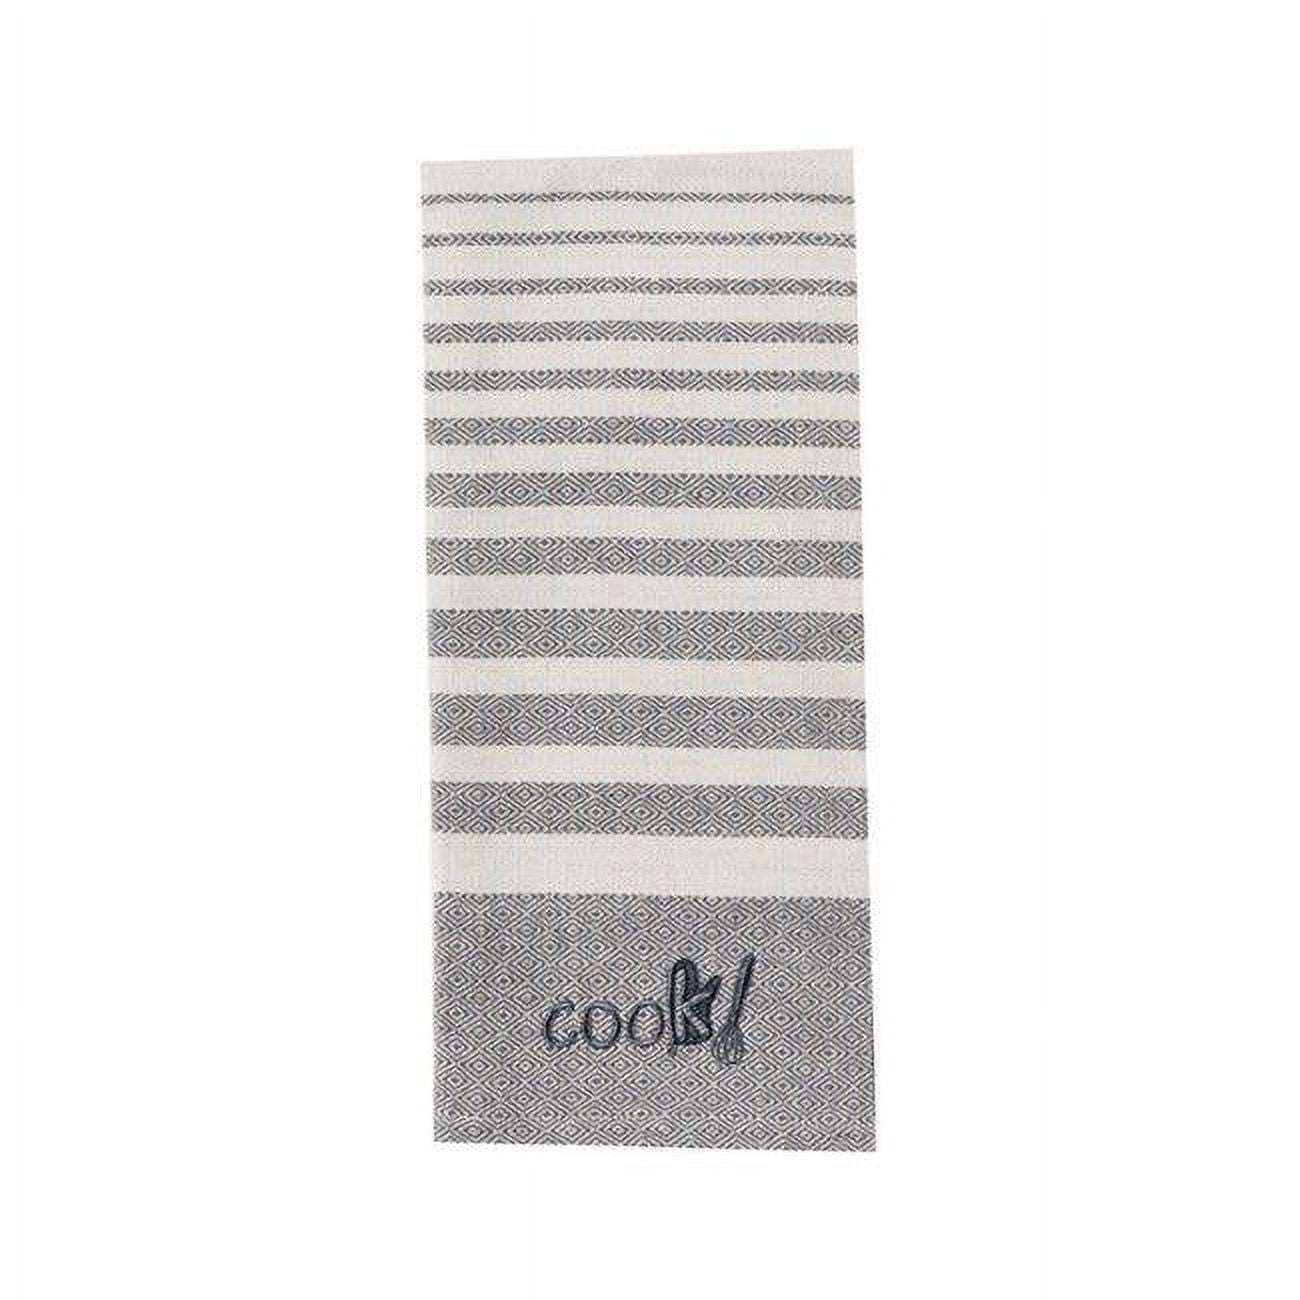 6662035 18 X 28 In. Graphite Cotton Tea Towel - Pack Of 6